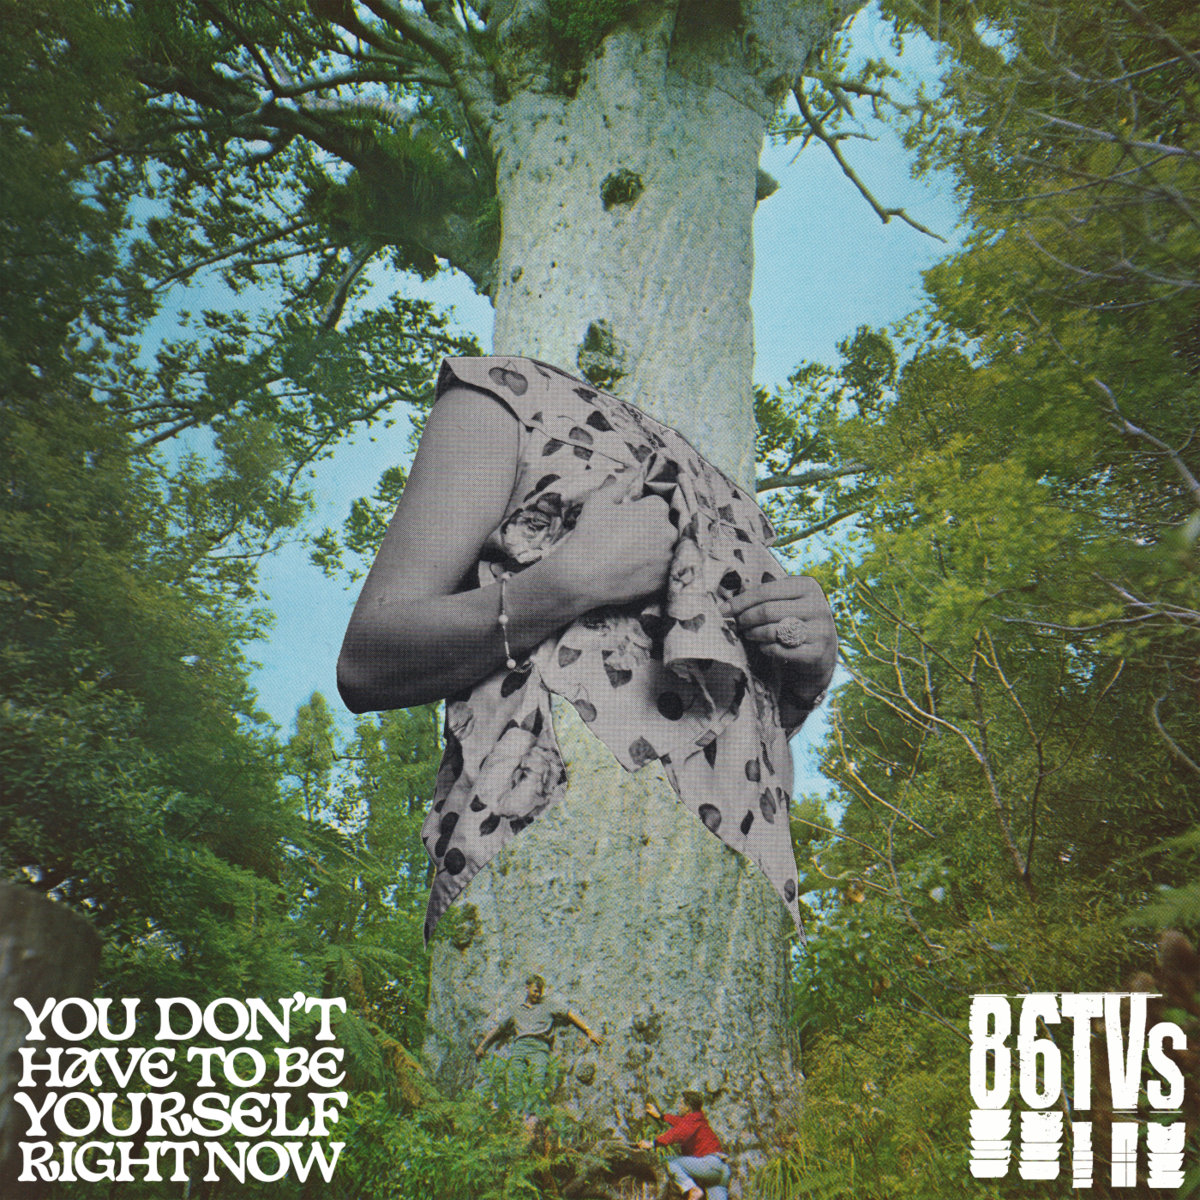 86TVS - YOU DON’T HAVE TO BE YOURSELF - LP